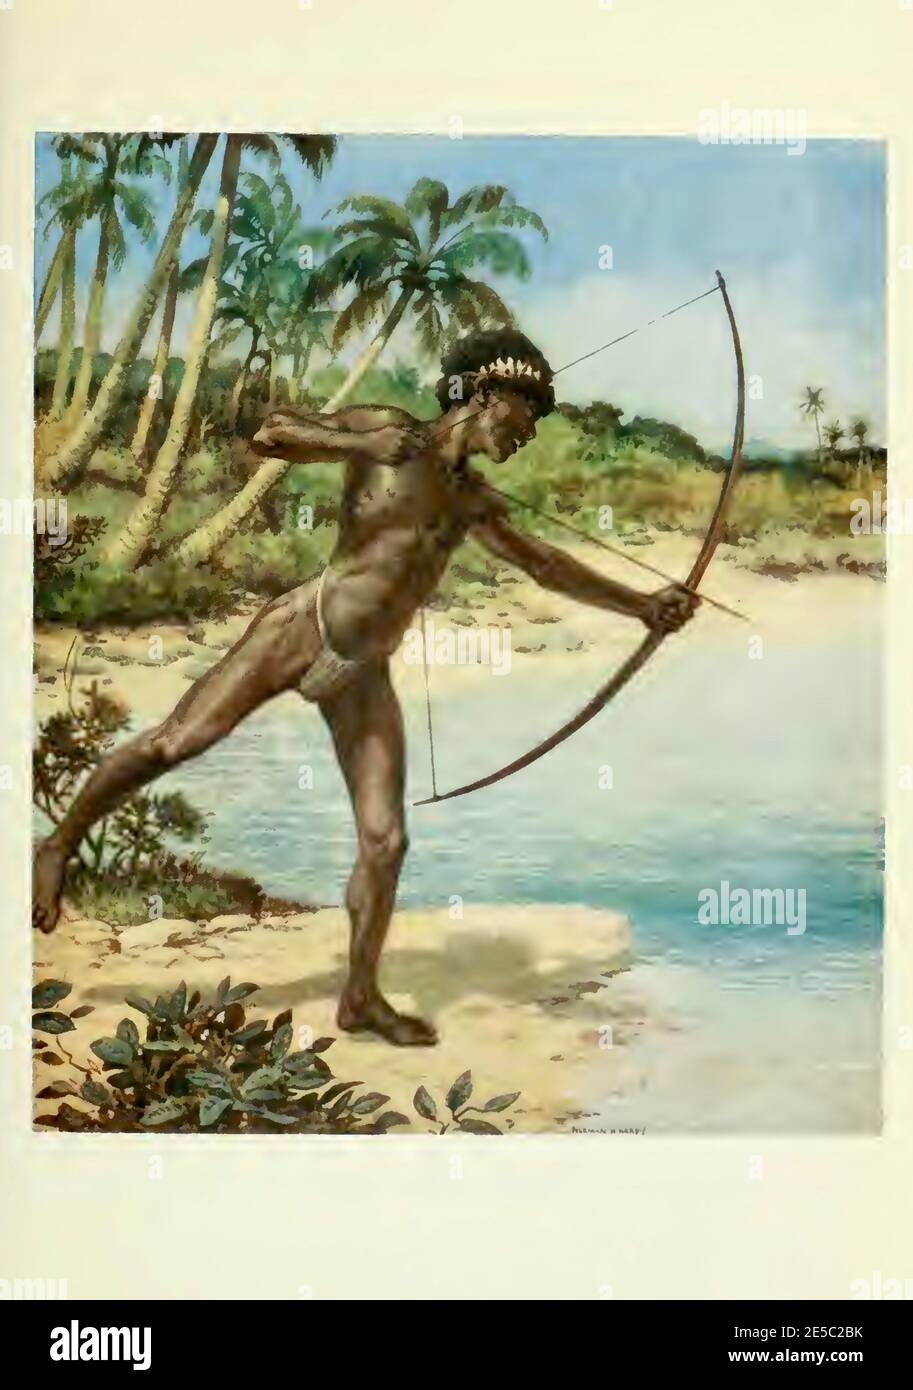 Native archer from the Soloman Islands stands poised on the water's edge waiting to shoot fish. Norman Hardy painting from the early 1900's. Stock Photo